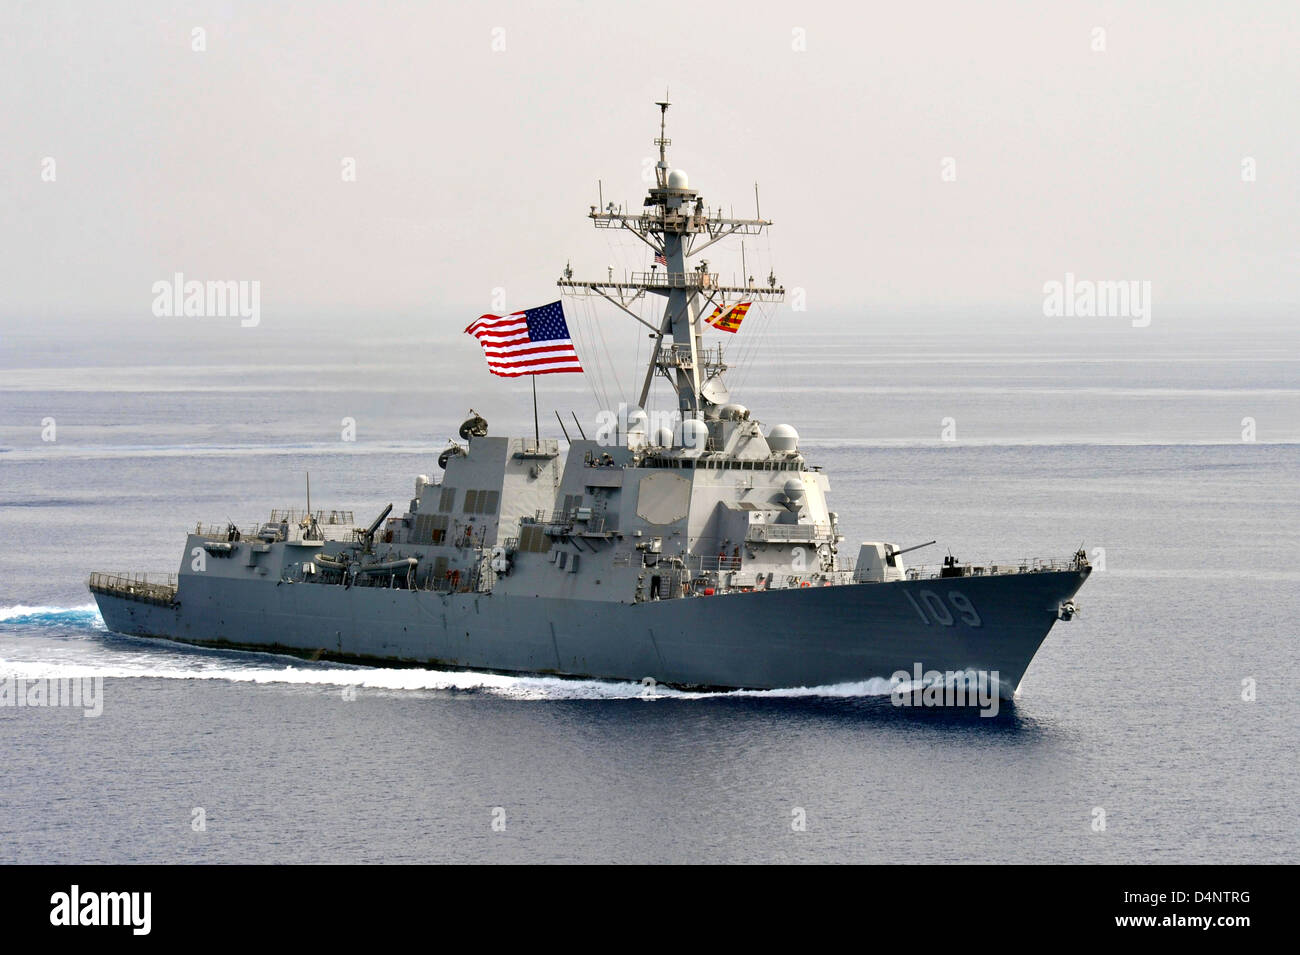 The US Navy Guided-missile destroyer USS Jason Dunham operating March 14, 2013 in the Arabian Sea in support of the Afghan War. Stock Photo